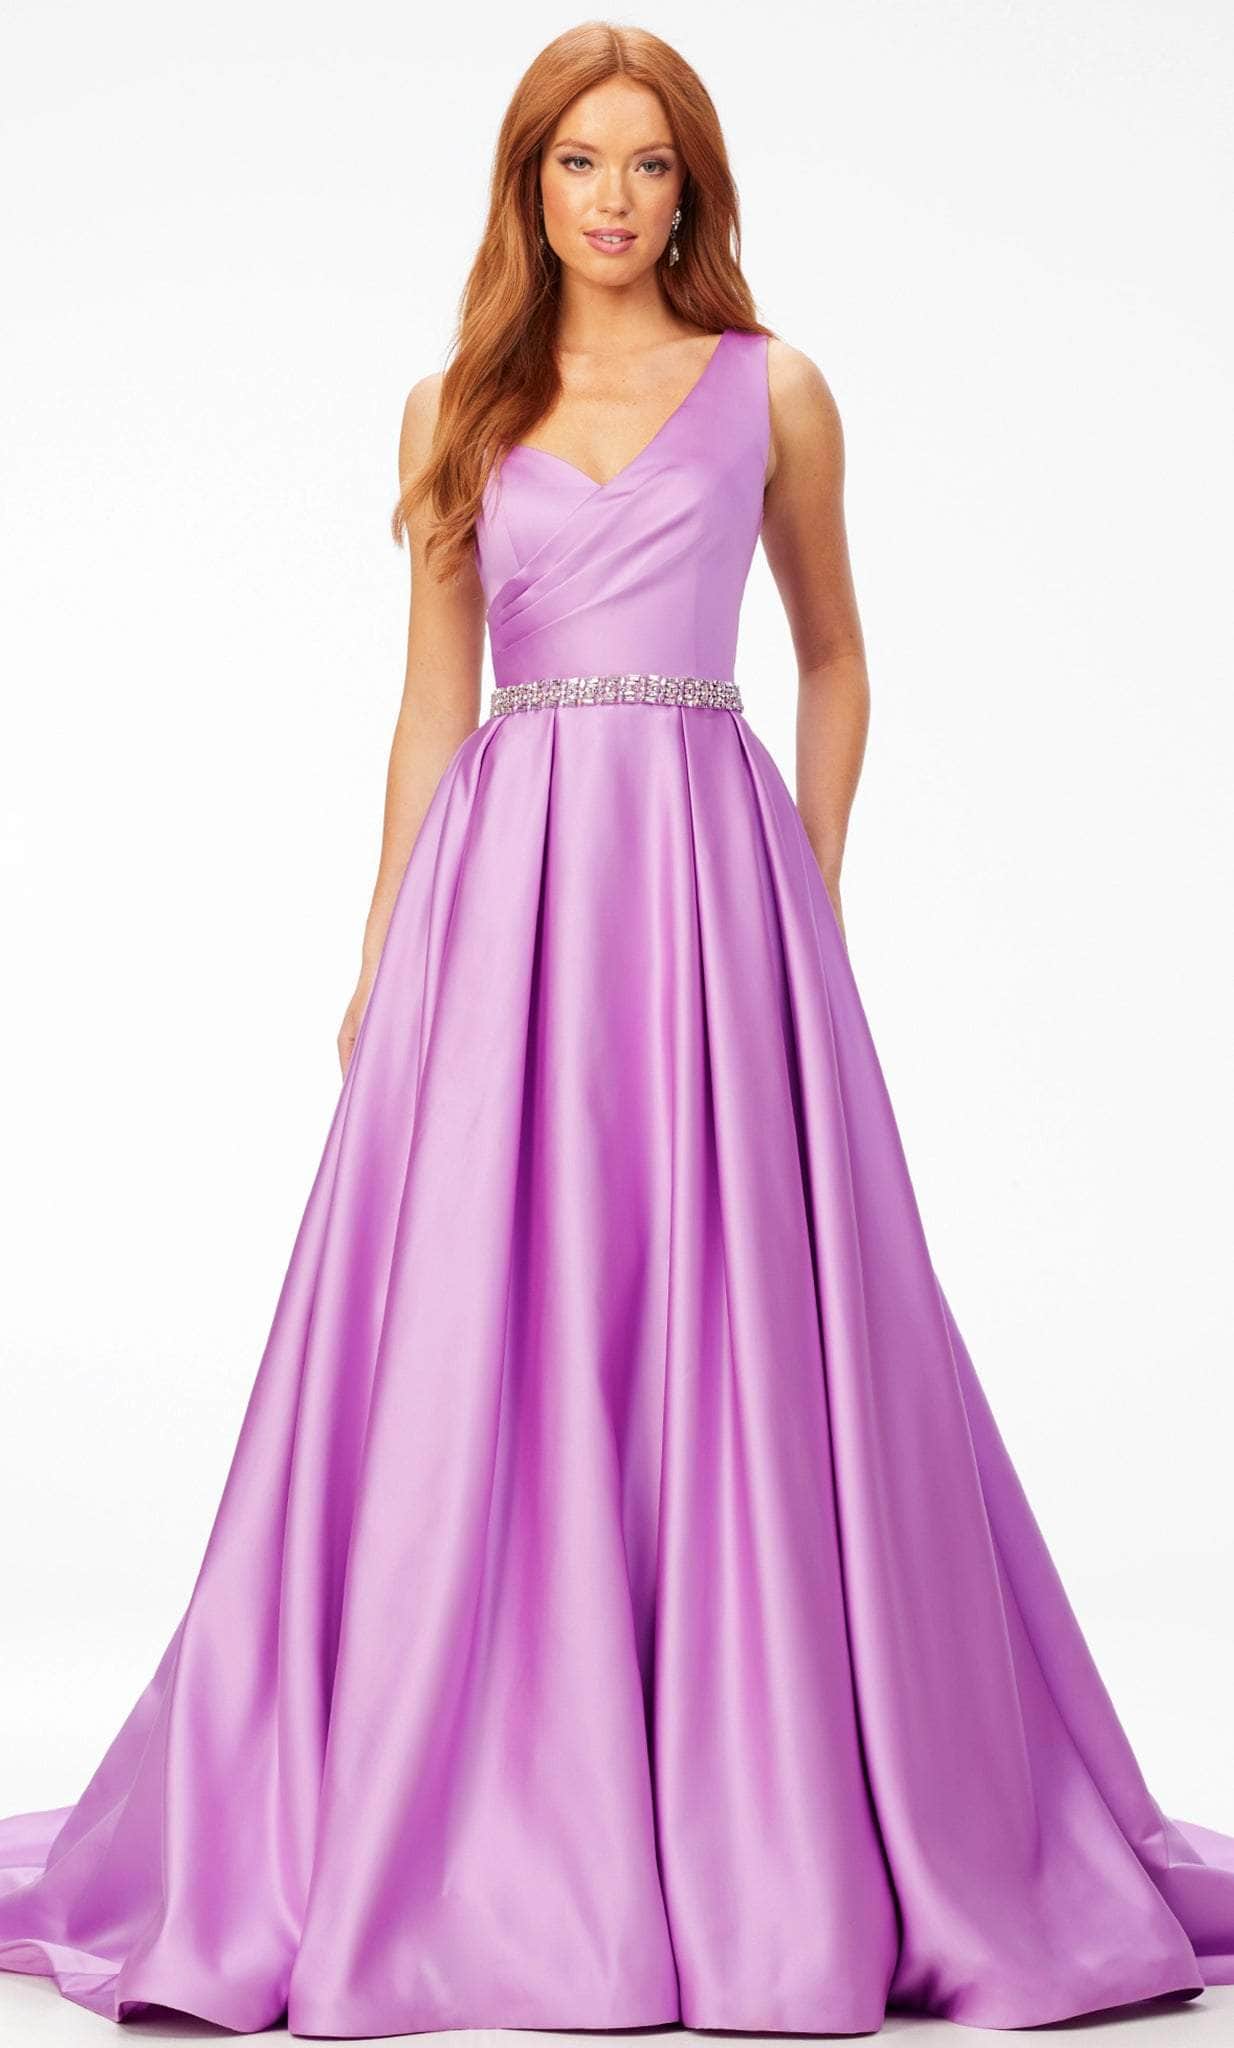 Ashley Lauren 11075 - Satin Pleated One Shoulder A-line Gown Prom Dresses 0 / Lilac